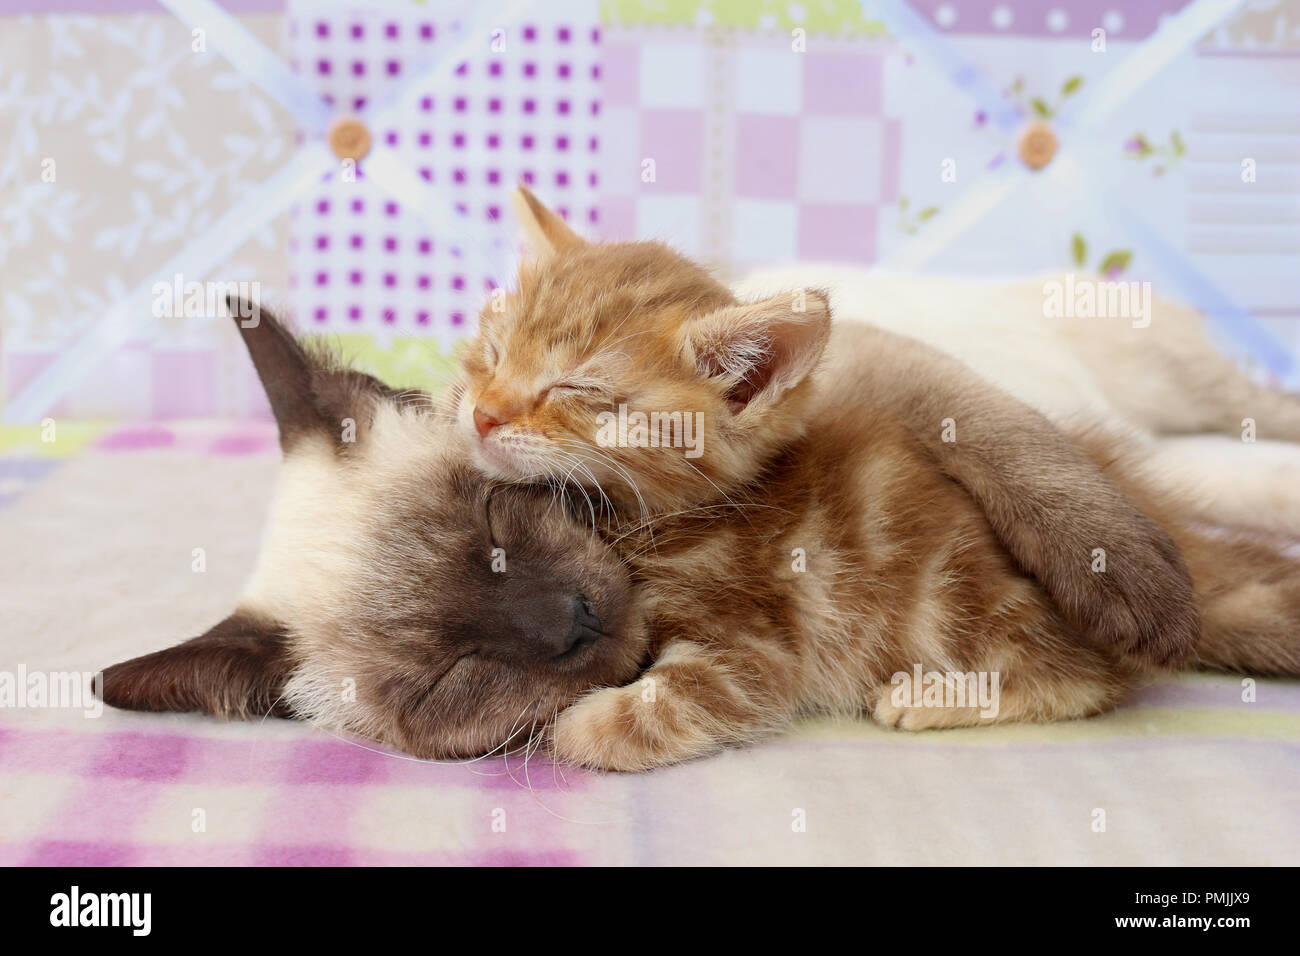 cat and kitten sleeping, seal point, red tabby Stock Photo